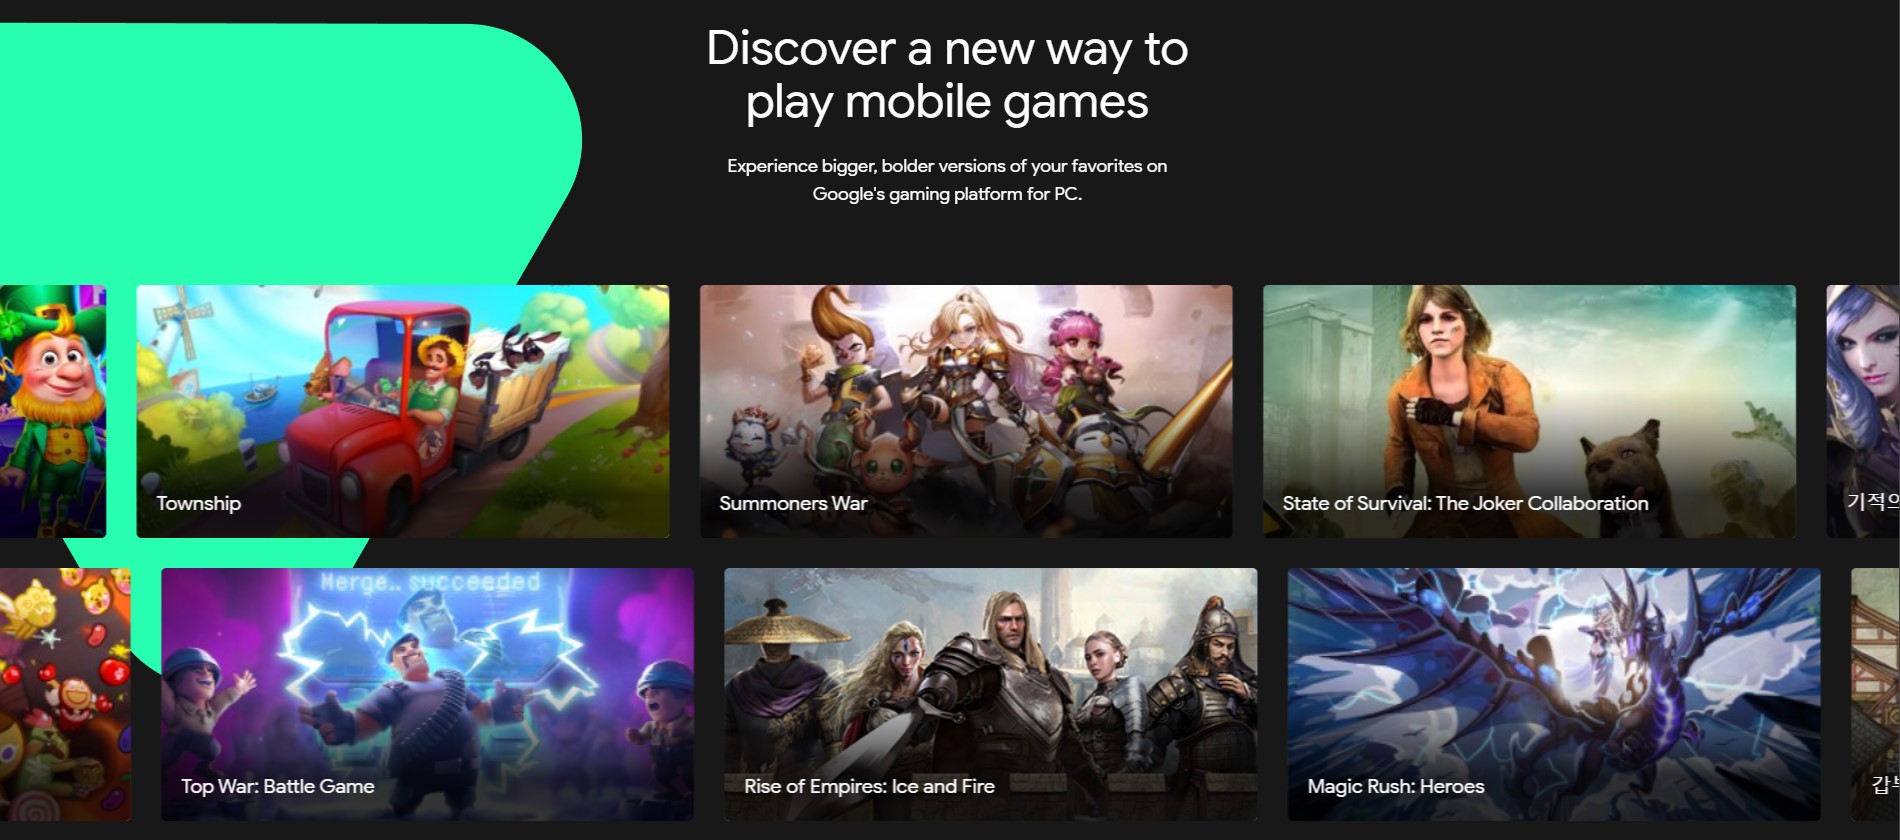 Google Play Games (Official Google Windows Emulator) Beta released. Beta  available in the US and select countries. : r/gachagaming